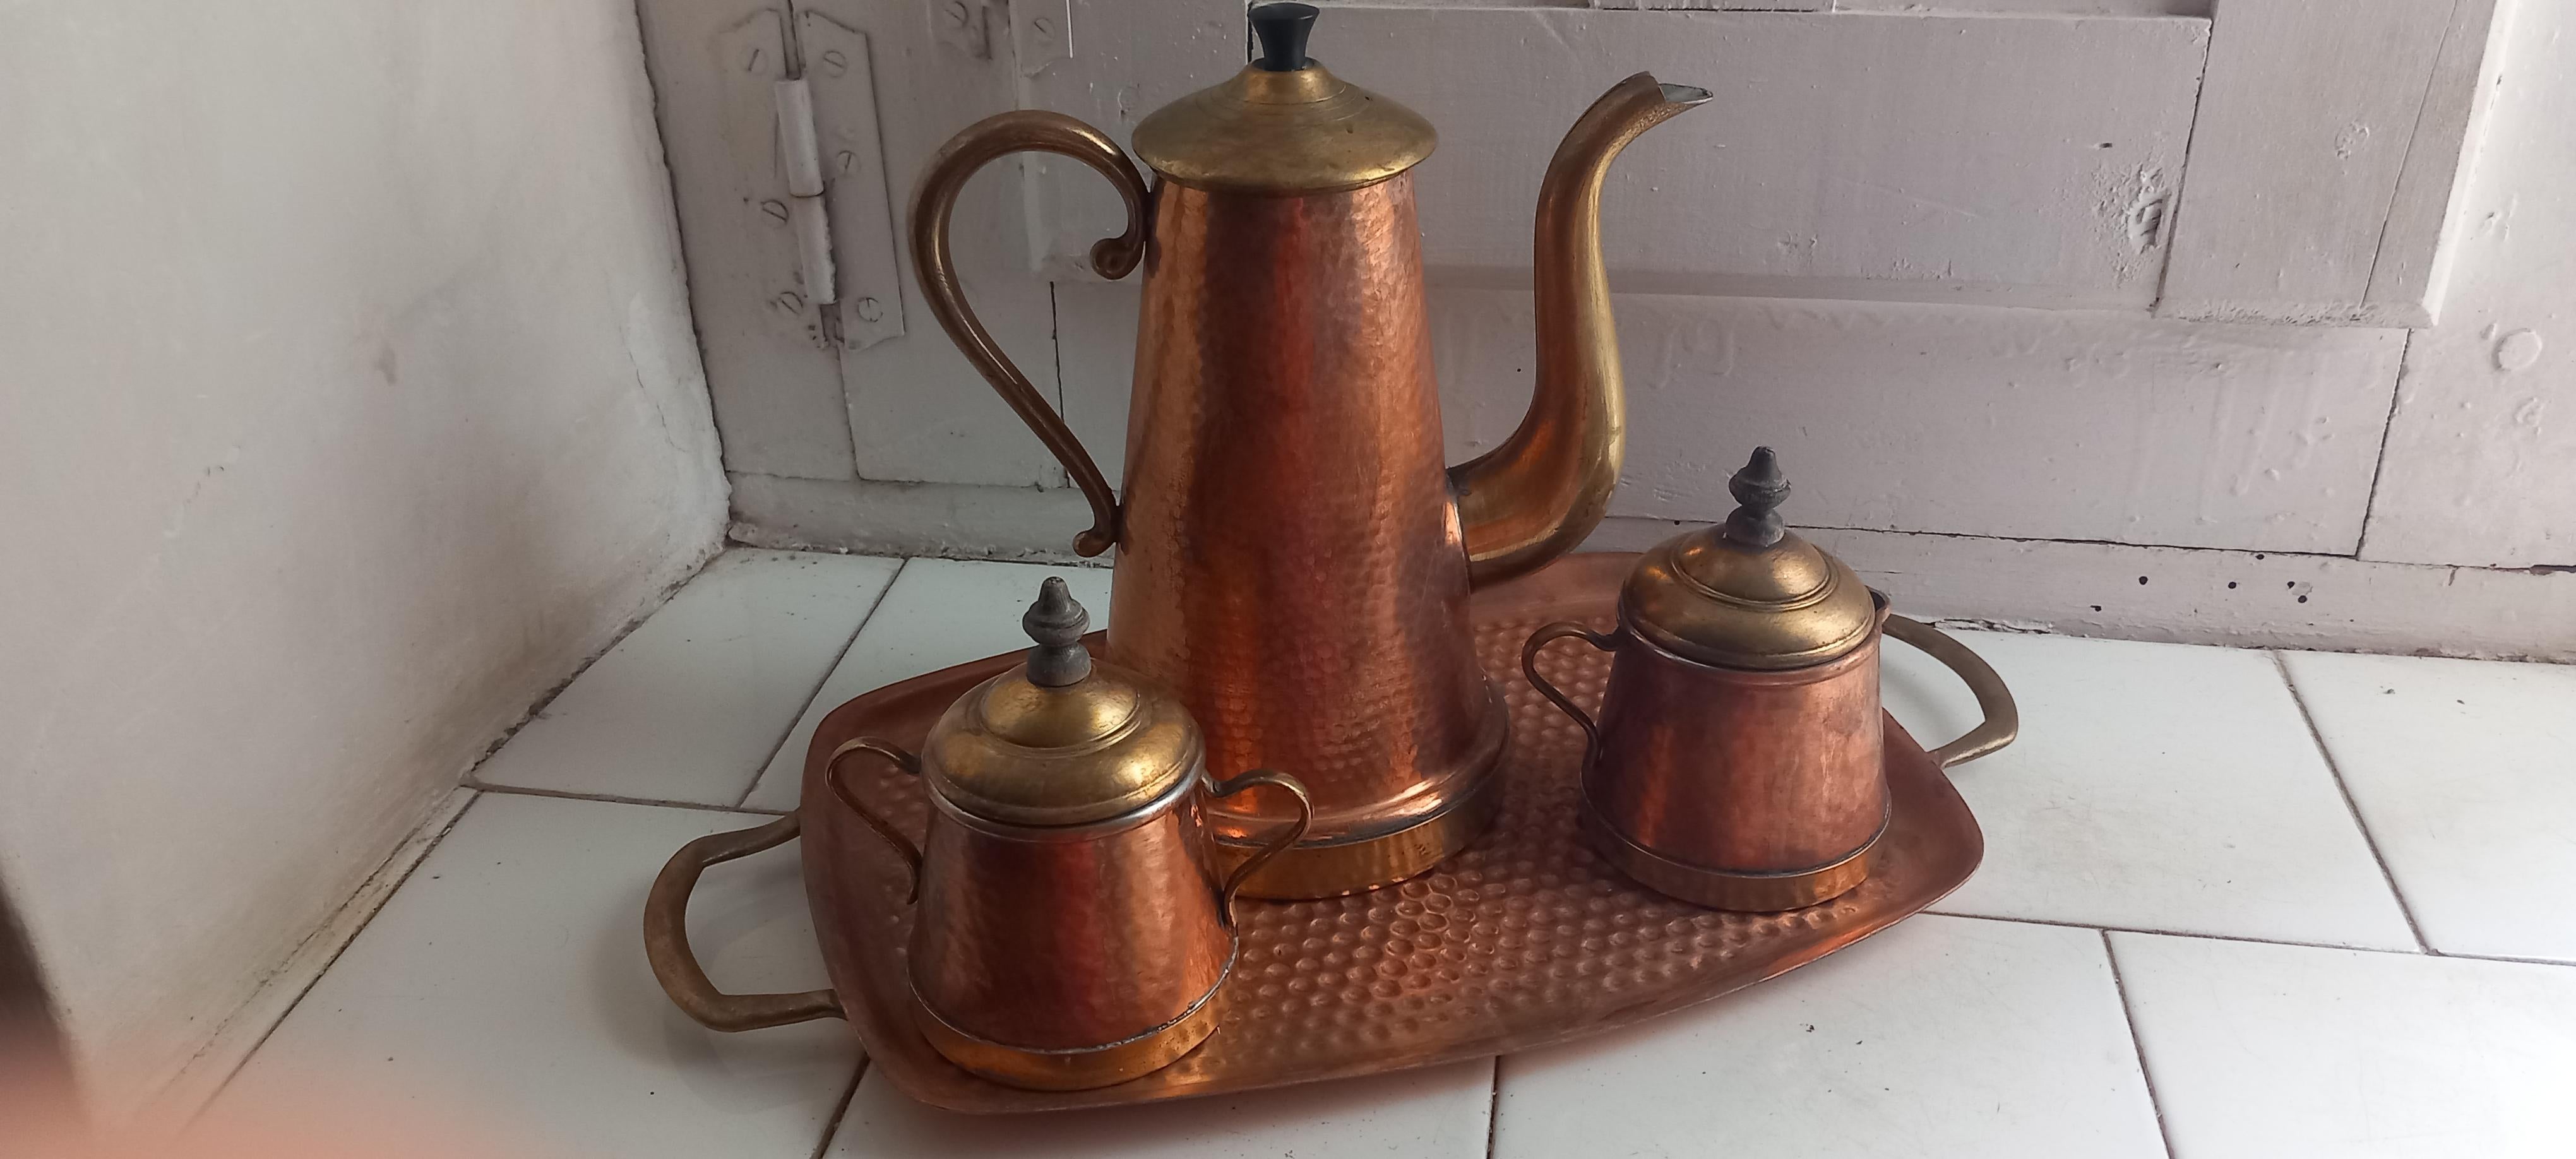 Copper and Brass Coffee or Tea set, Very Decorative  Early 20th Century For Sale 11